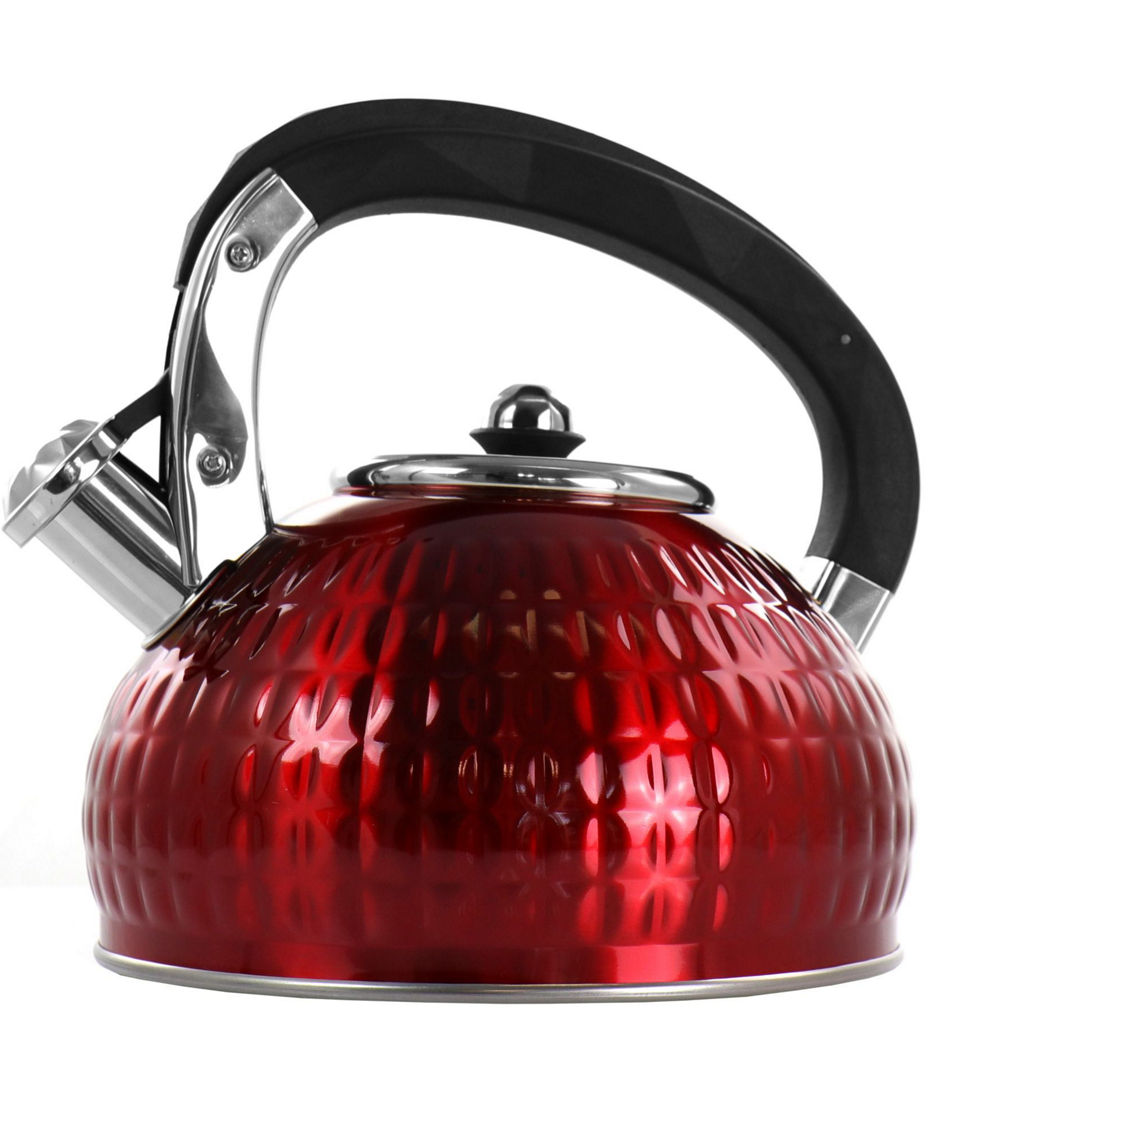 MegaChef 3 Liter Stovetop Whistling Kettle in Red - Image 2 of 5